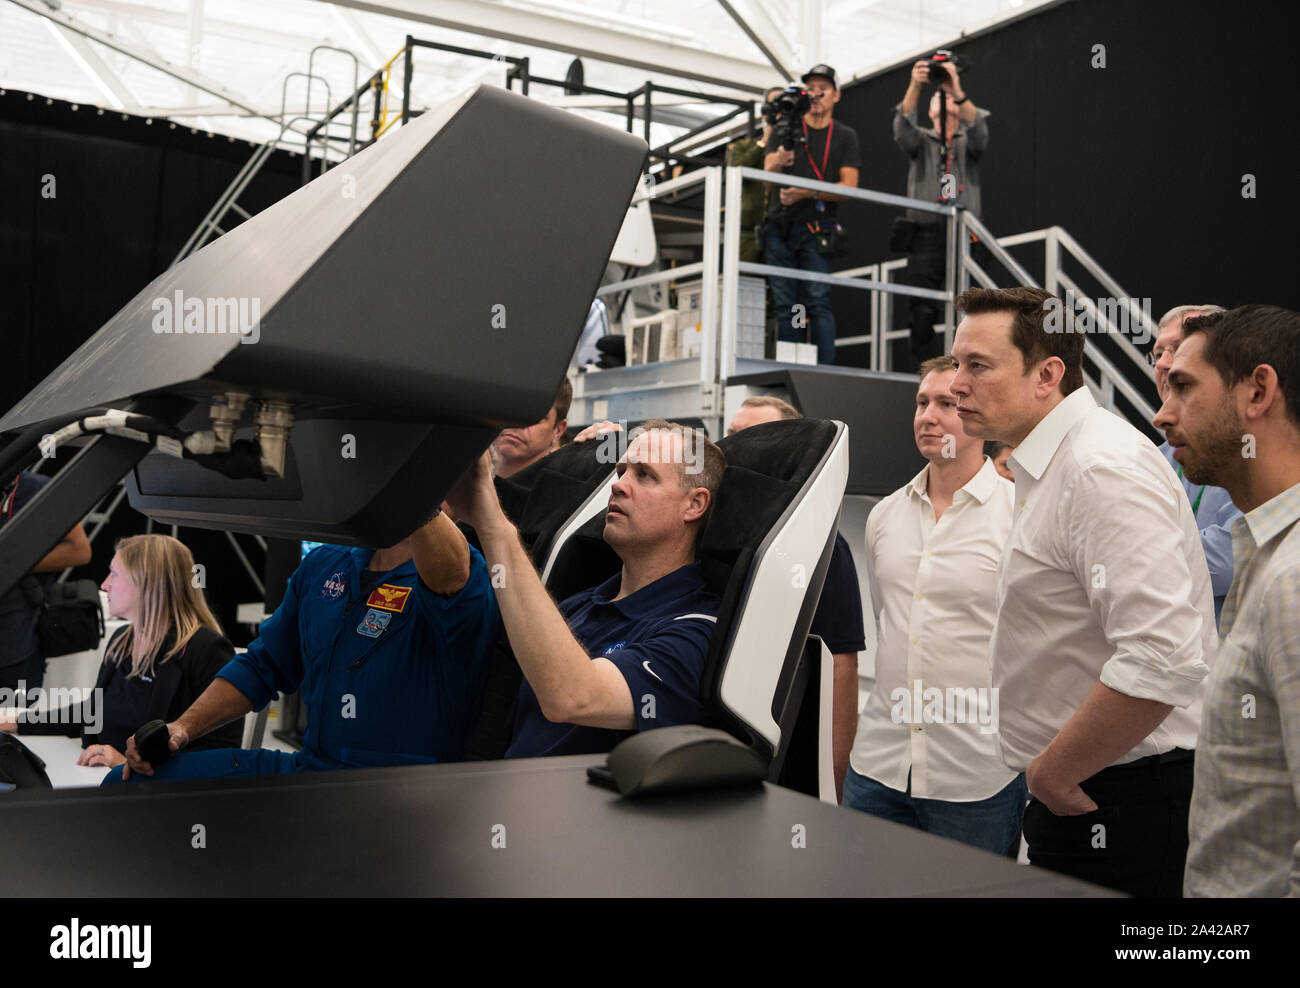 Hawthorne, United States. 11th Oct, 2019. NASA Administrator Jim Bridenstine, center, participates in a crew Dragon flight simulation with NASA astronauts Doug Hurley, and Bob Behnken, while SpaceX Chief Engineer Elon Musk looks on, at the SpaceX Headquarters on October 10, 2019, in Hawthorne, CA. NASA Photo by Aubrey Gemignani/UPI Credit: UPI/Alamy Live News Stock Photo